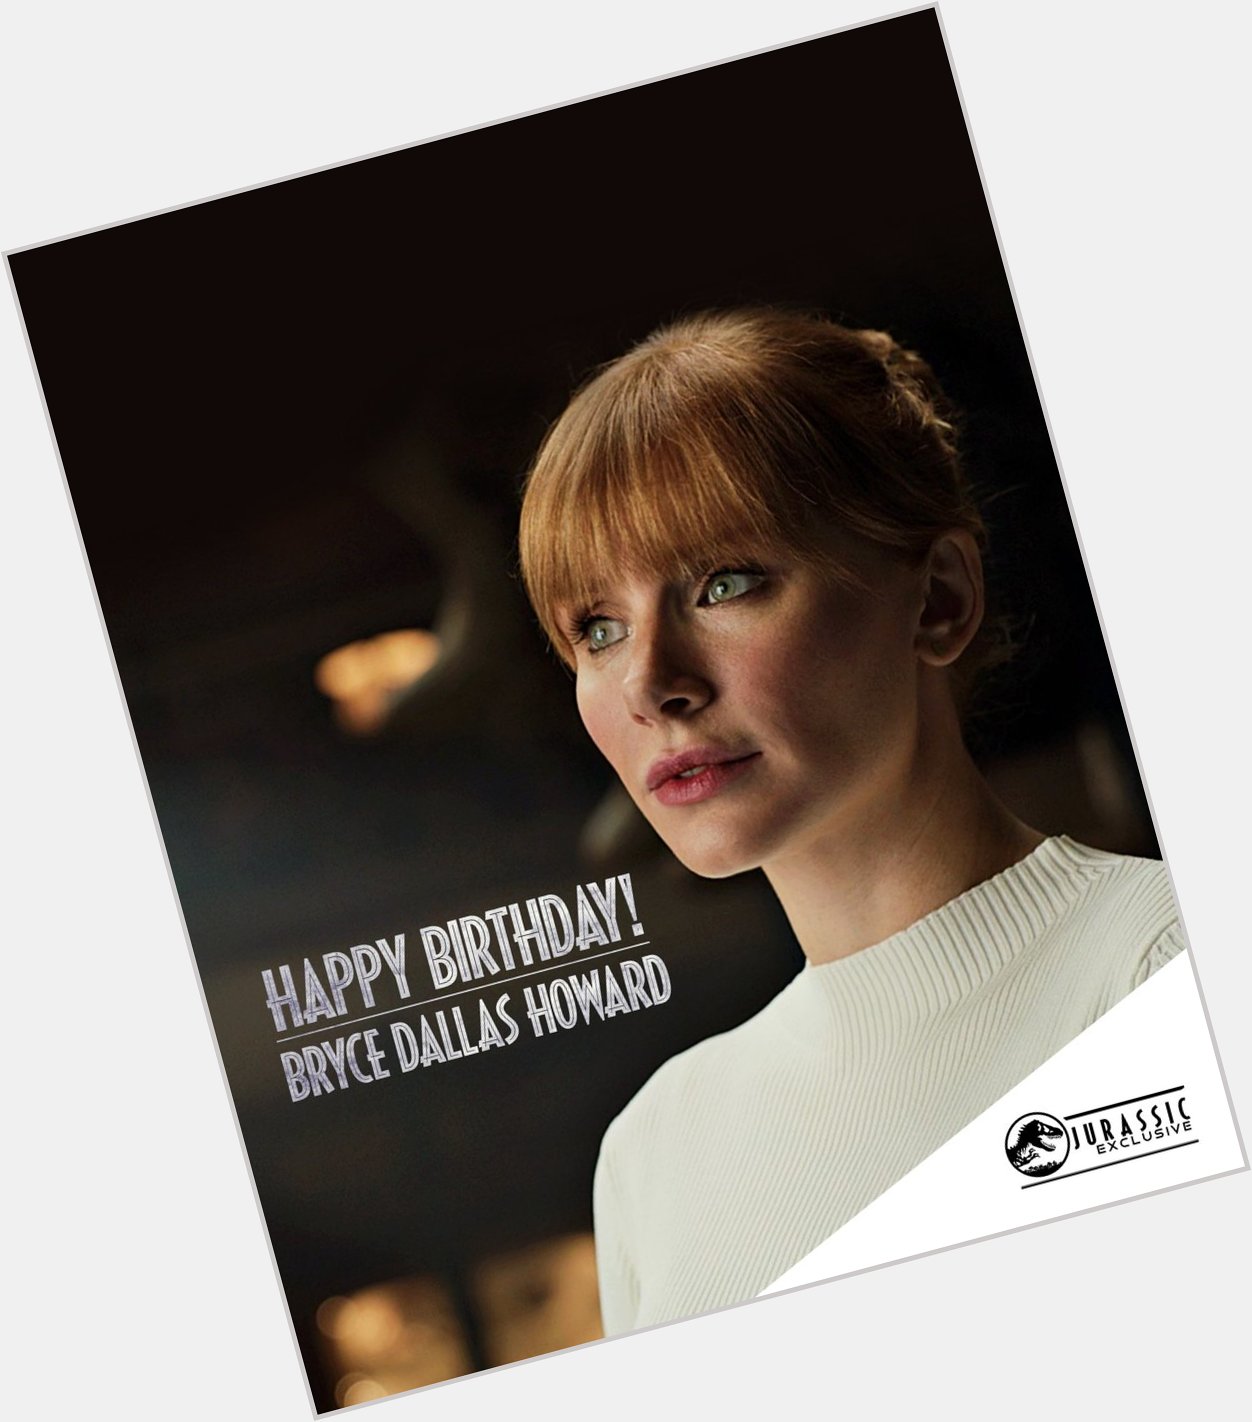 Happy birthday Bryce Dallas Howard , we wish you all the best in the world, cheers! With love      